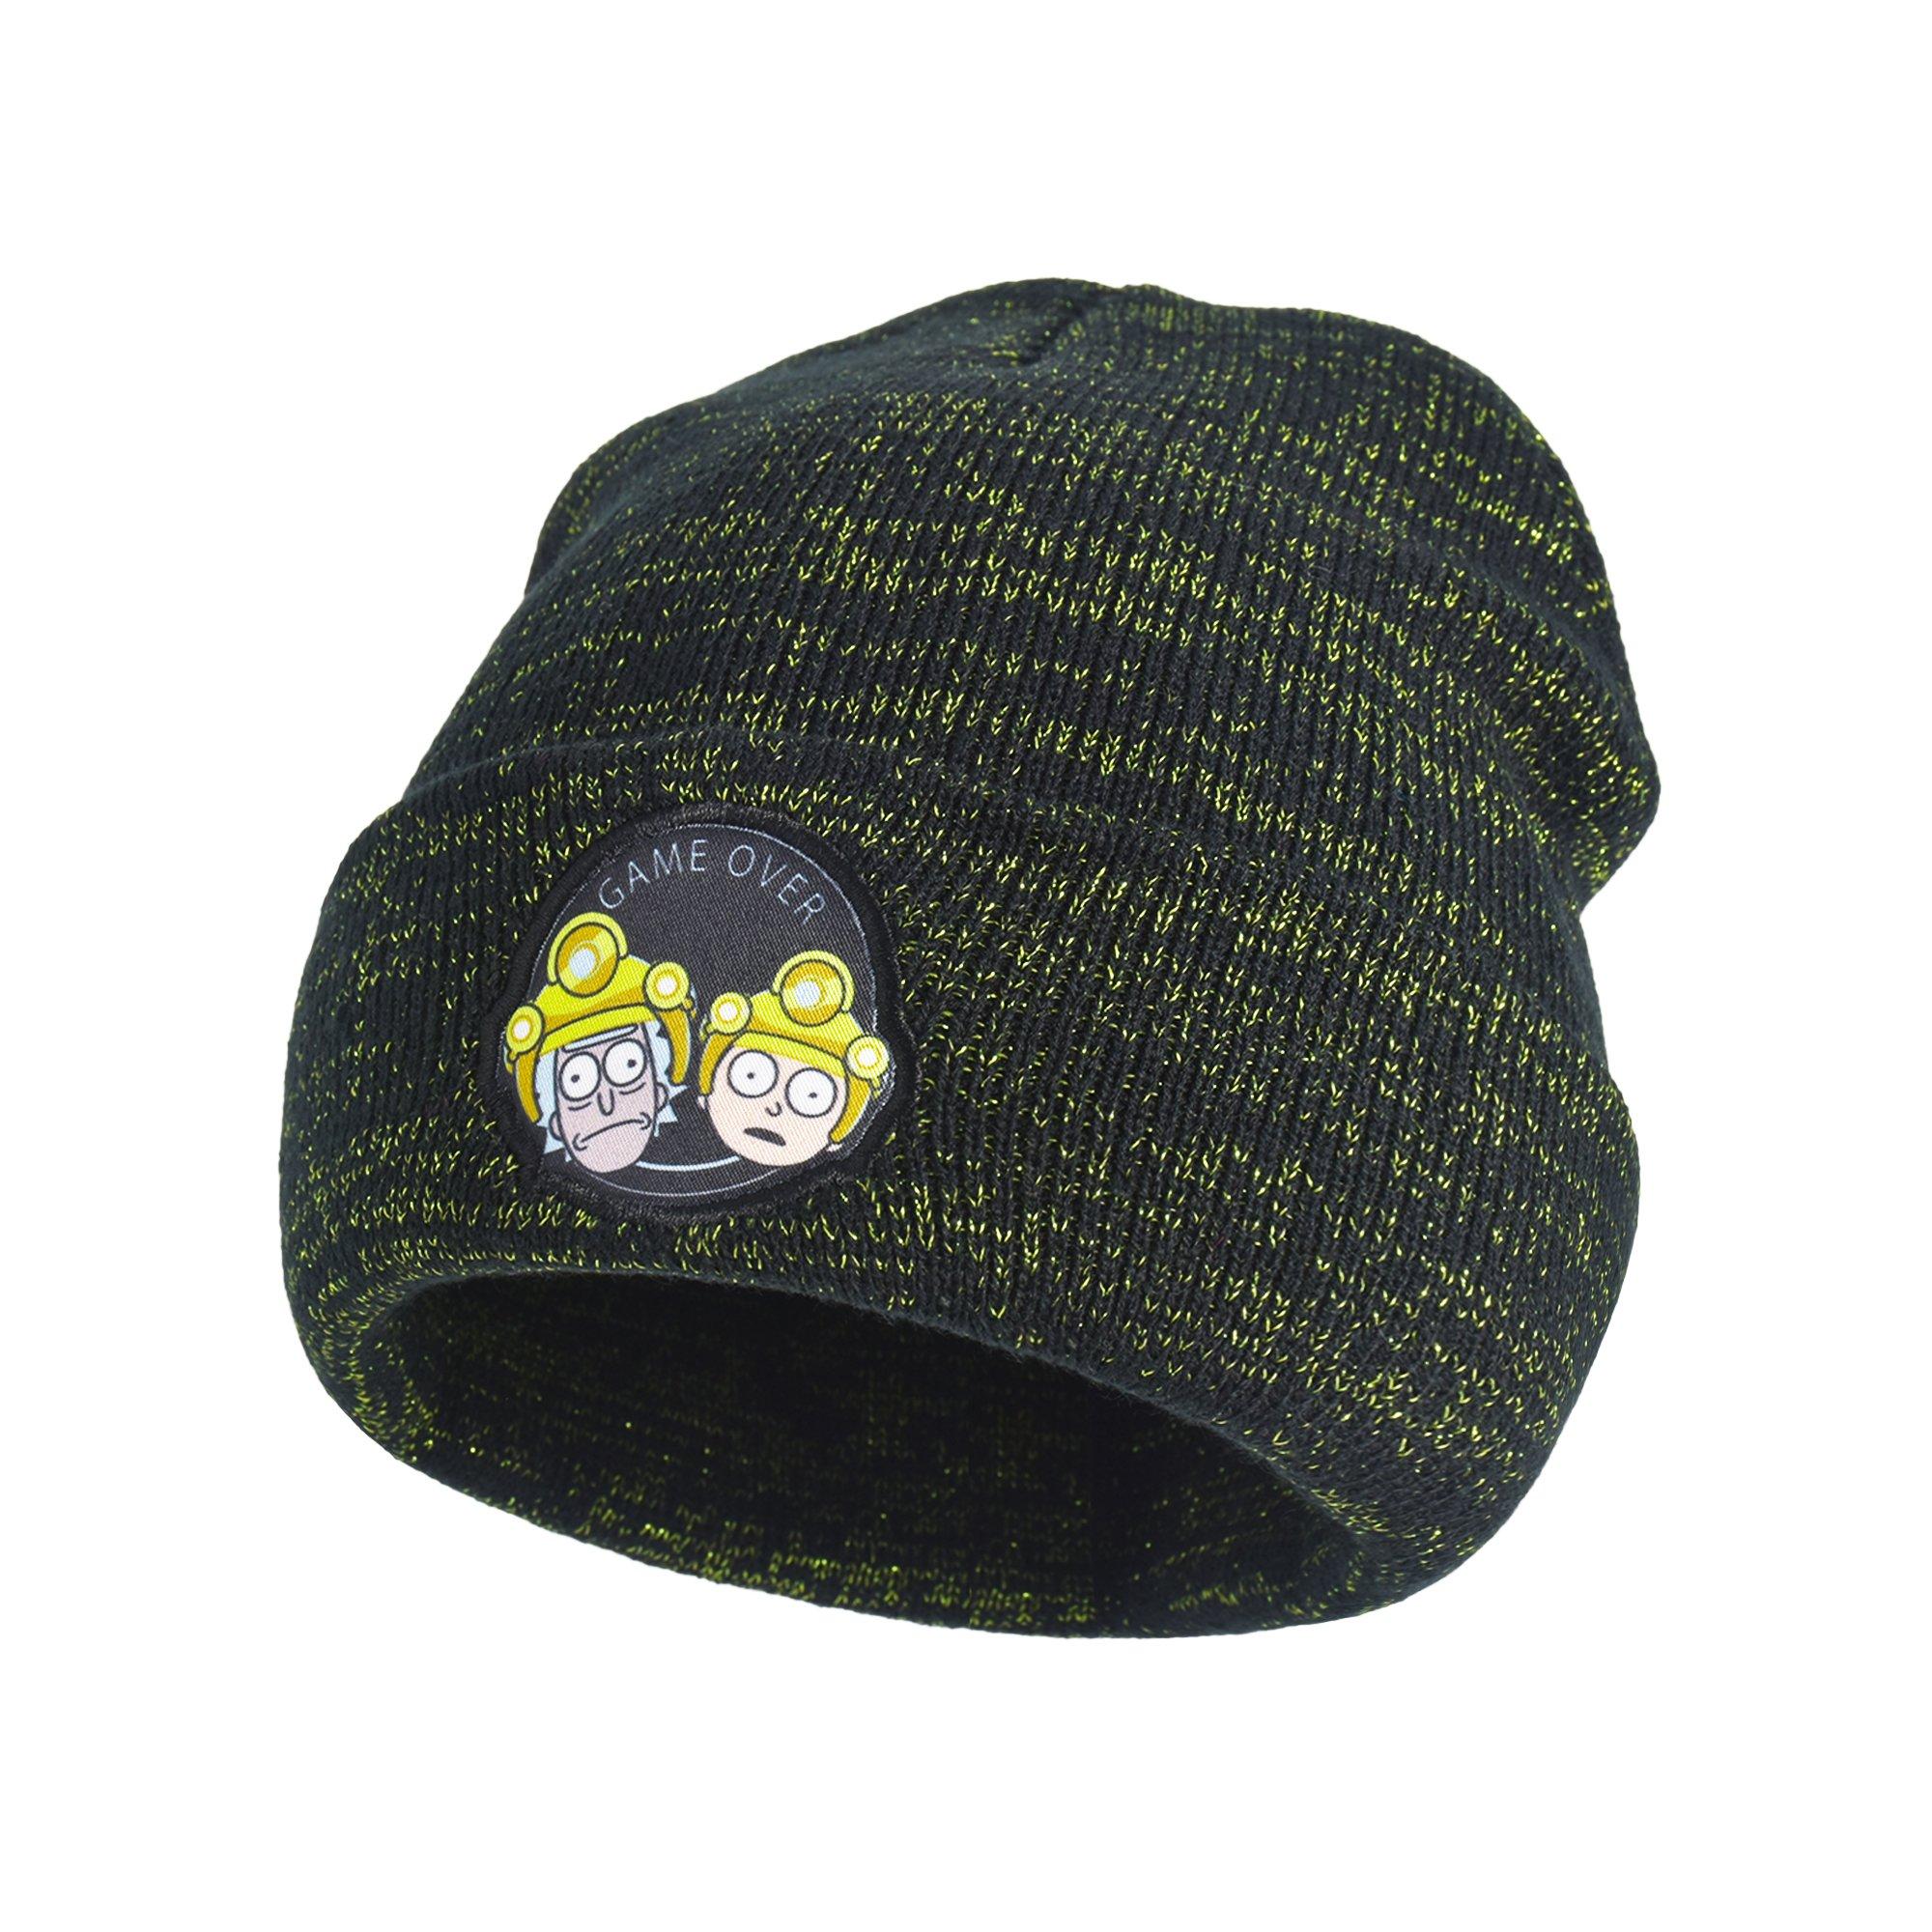 Rick and Morty Space Unisex Black Cuffed Beanie